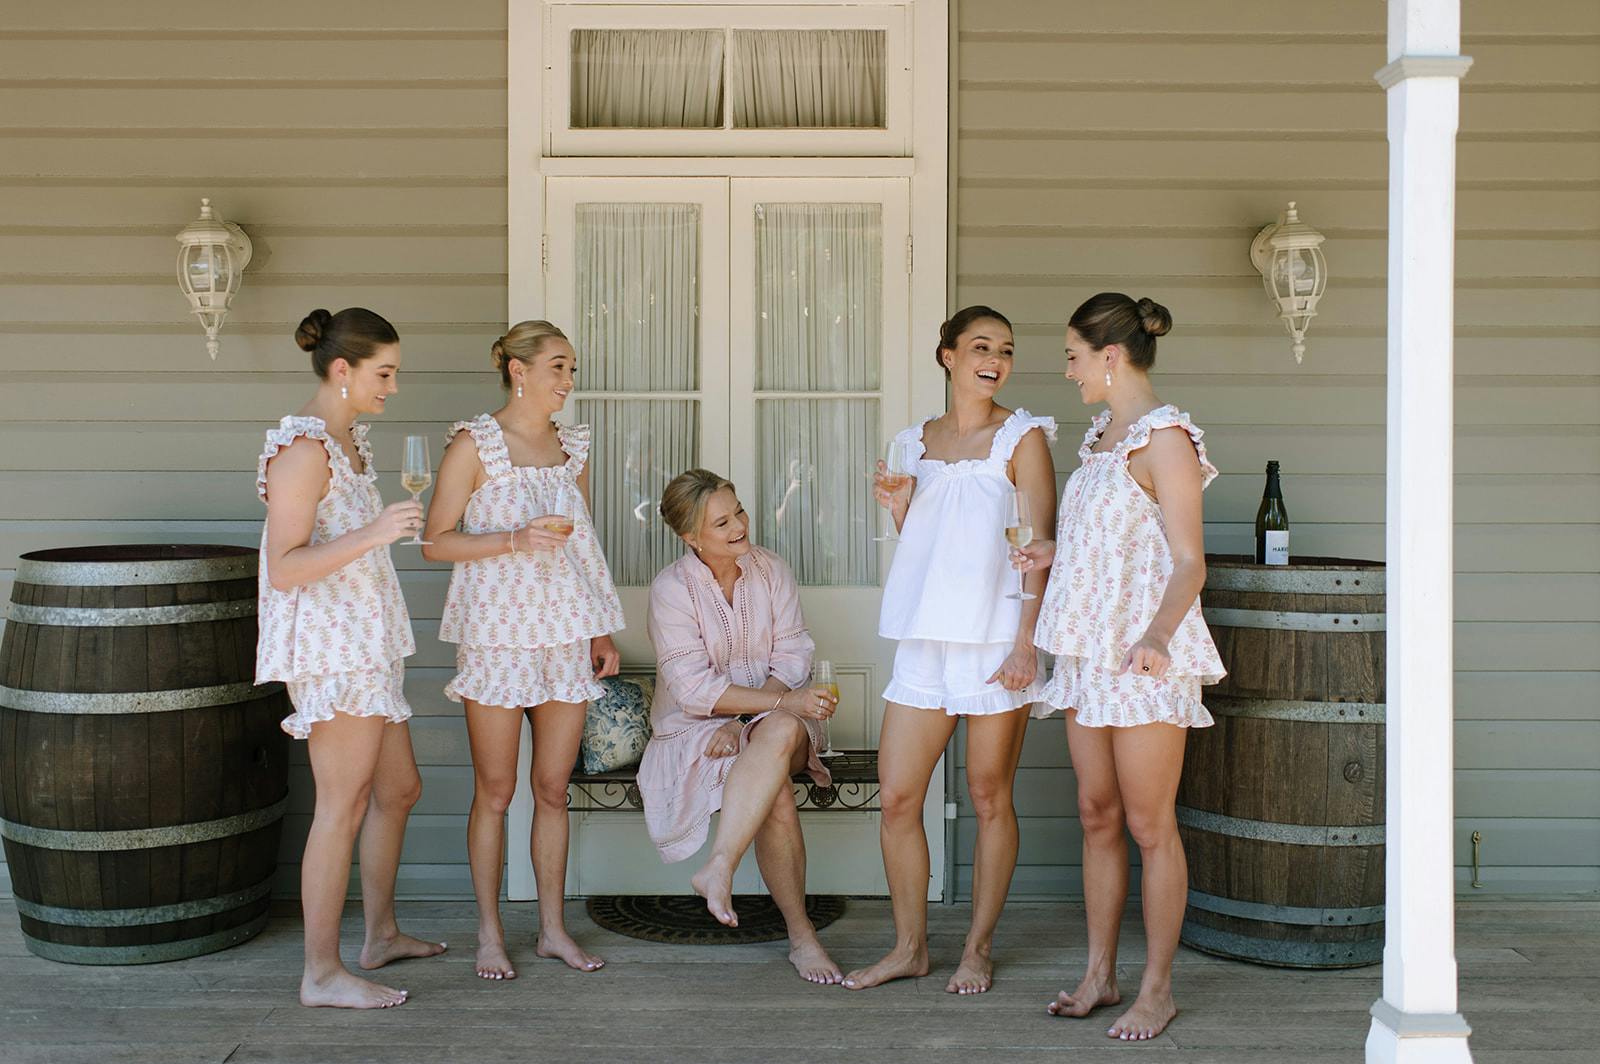 A group of five women, dressed in matching floral pajamas, gather on a wooden porch. One woman sits on a chair holding a drink, while the others stand and laugh, holding glasses. They appear to be enjoying a casual and joyful moment together.